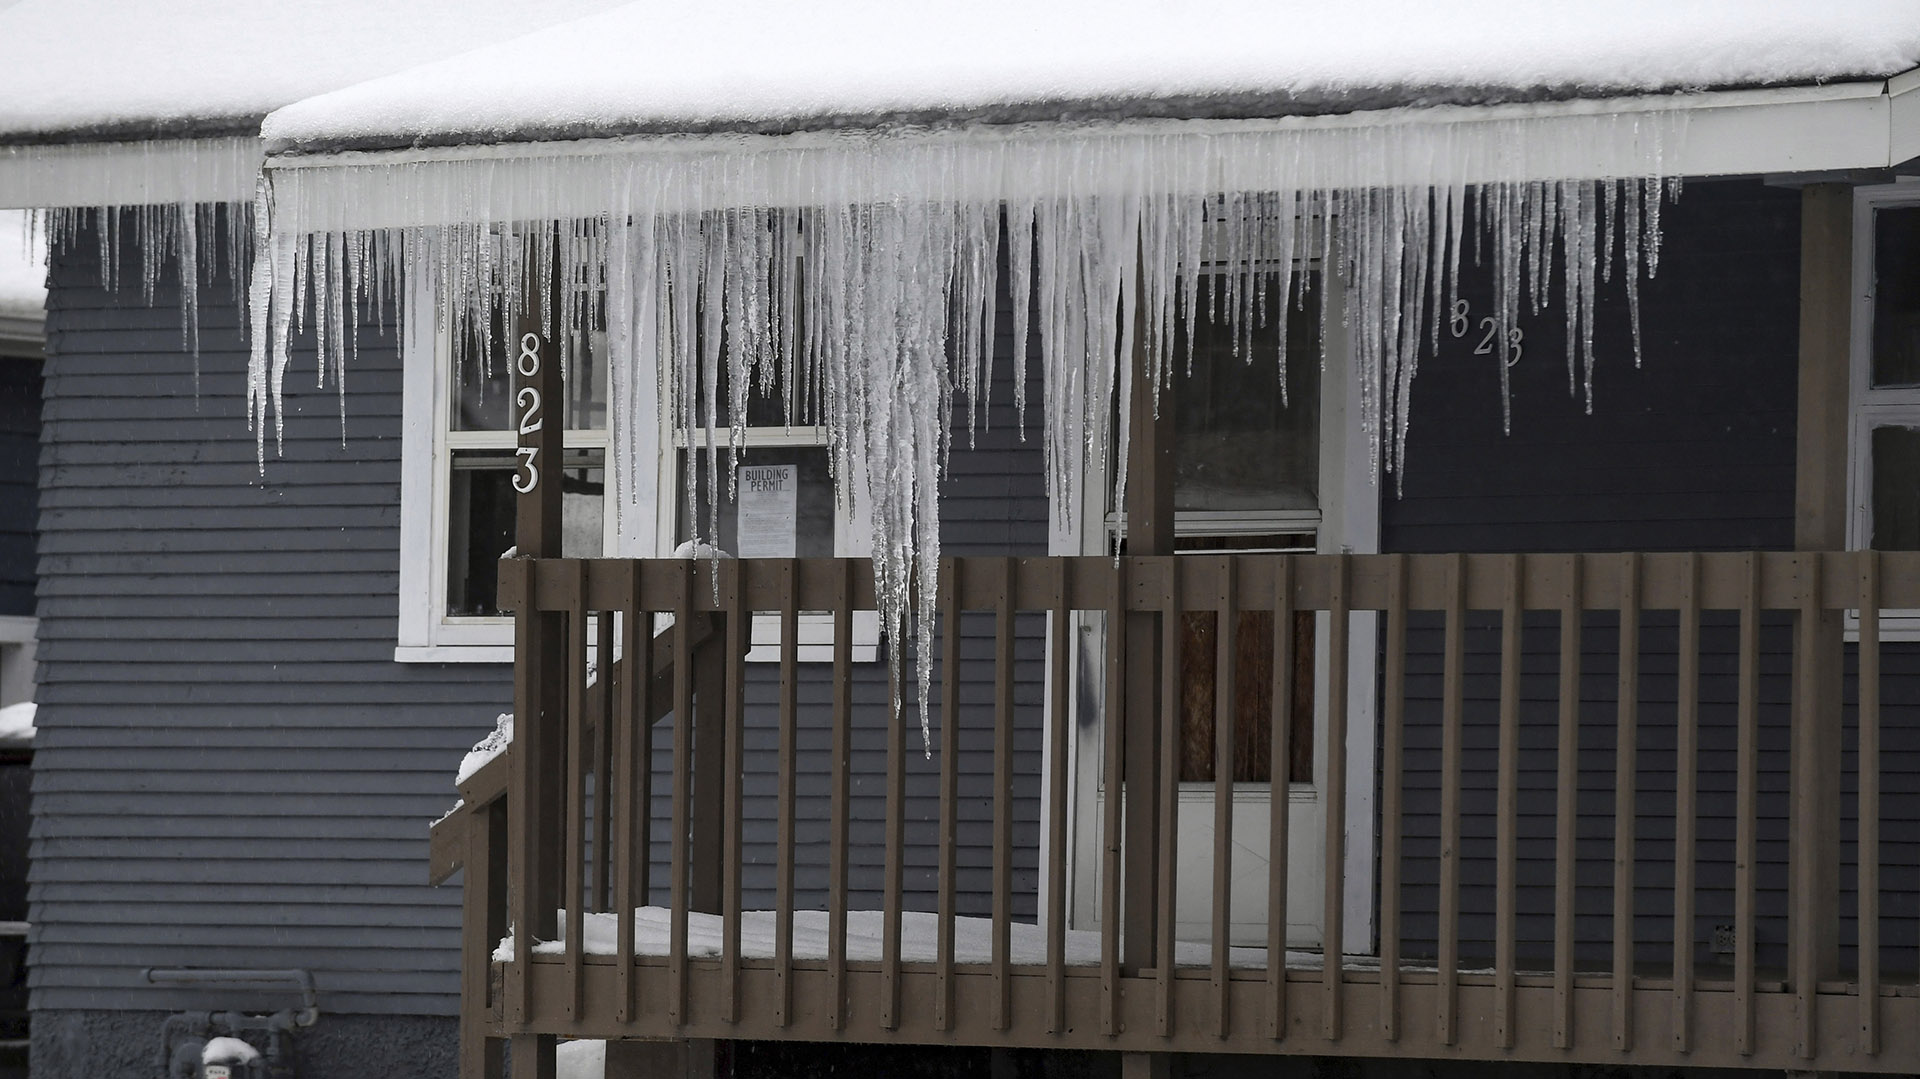 Subzero temperatures, ice and snow accumulation in 15 states of the nation (Erin Woodiel /The Argus Leader via AP)